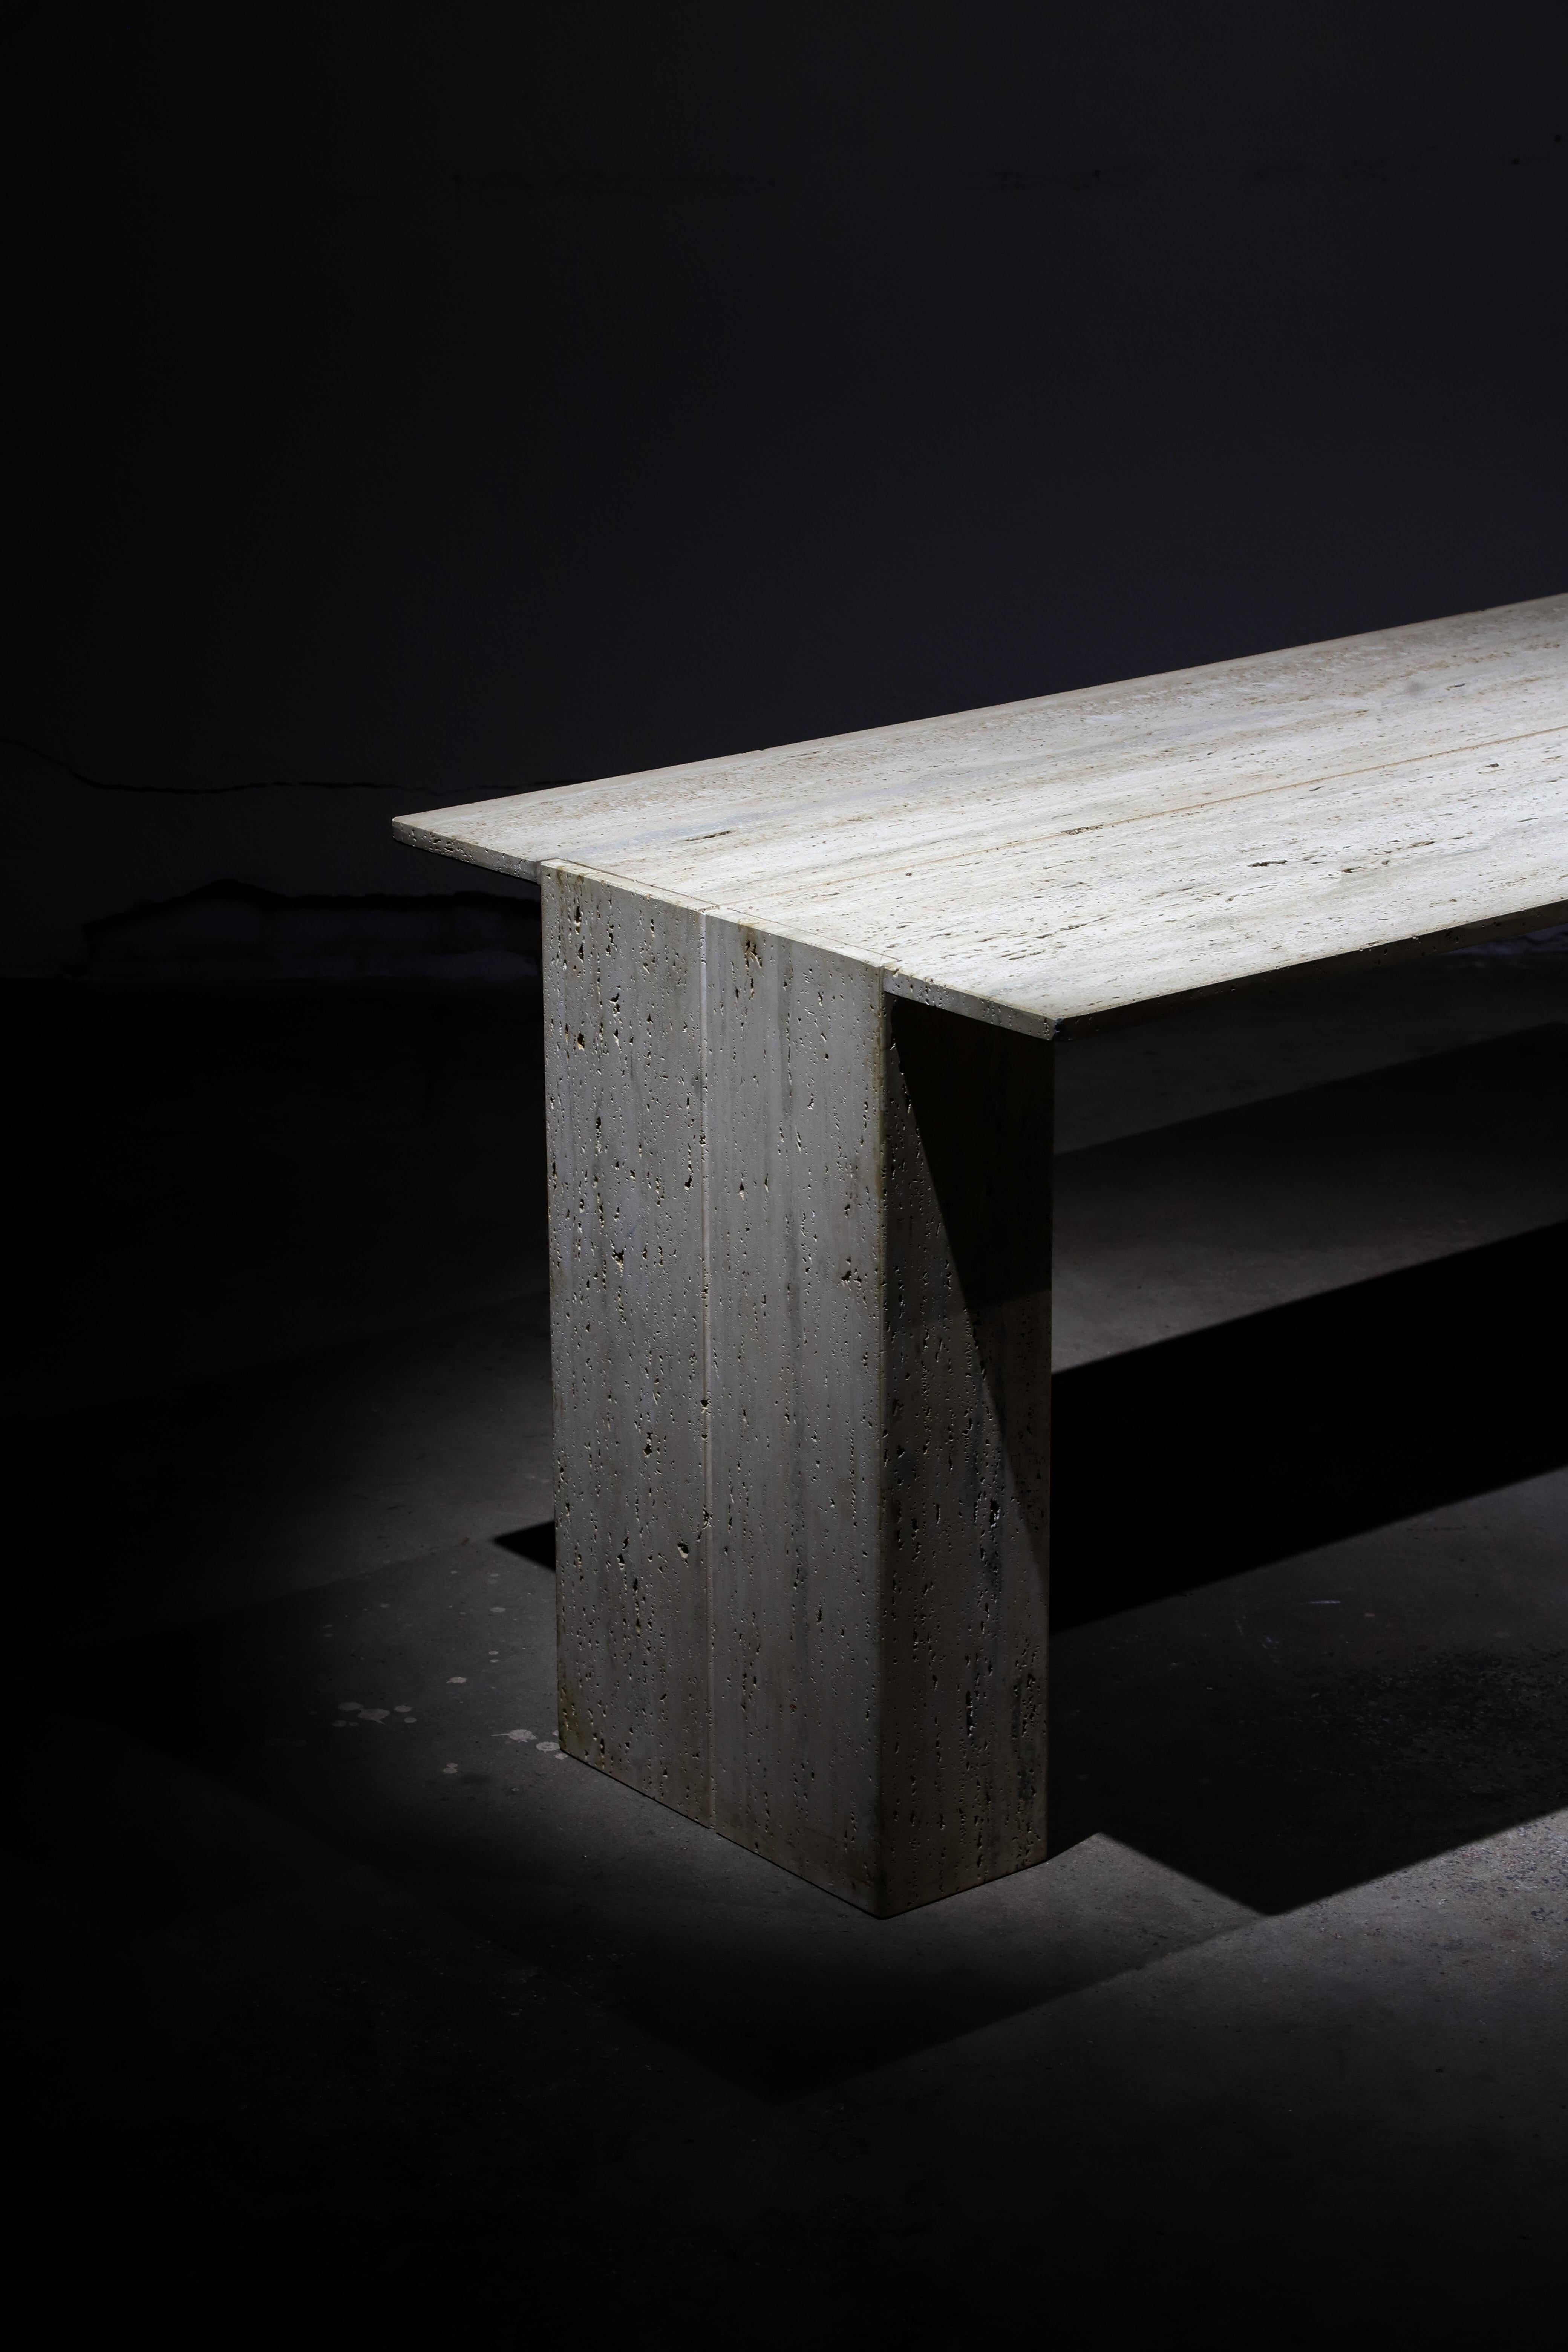 Elegant travertine dining table, entry table or desk. Large travertine slab rests atop two travertine boxed columns.